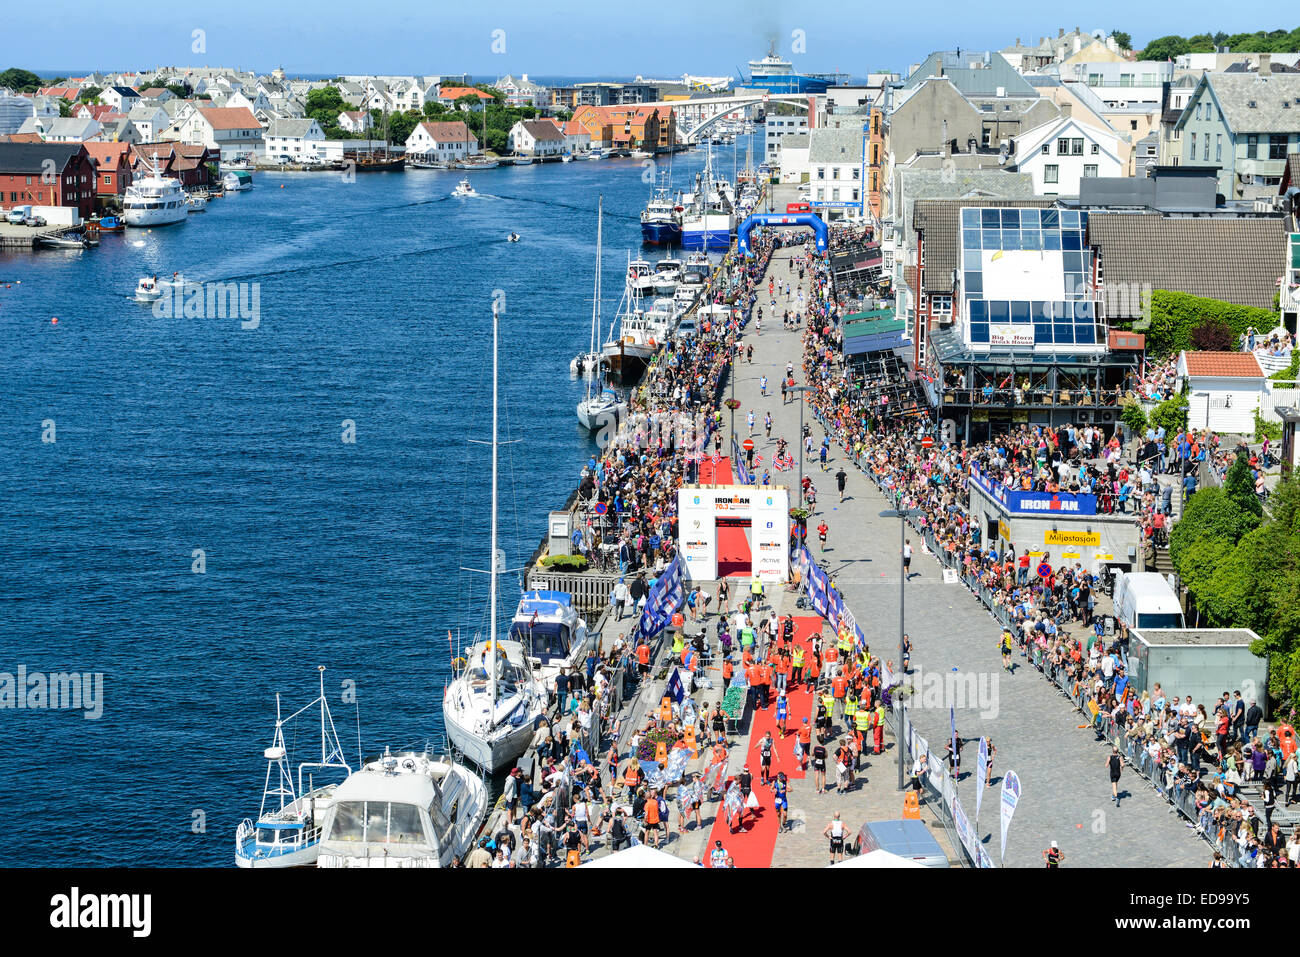 Crowds flock to the finish line for Ironman 70.3 Norway in Haugesund. Stock Photo